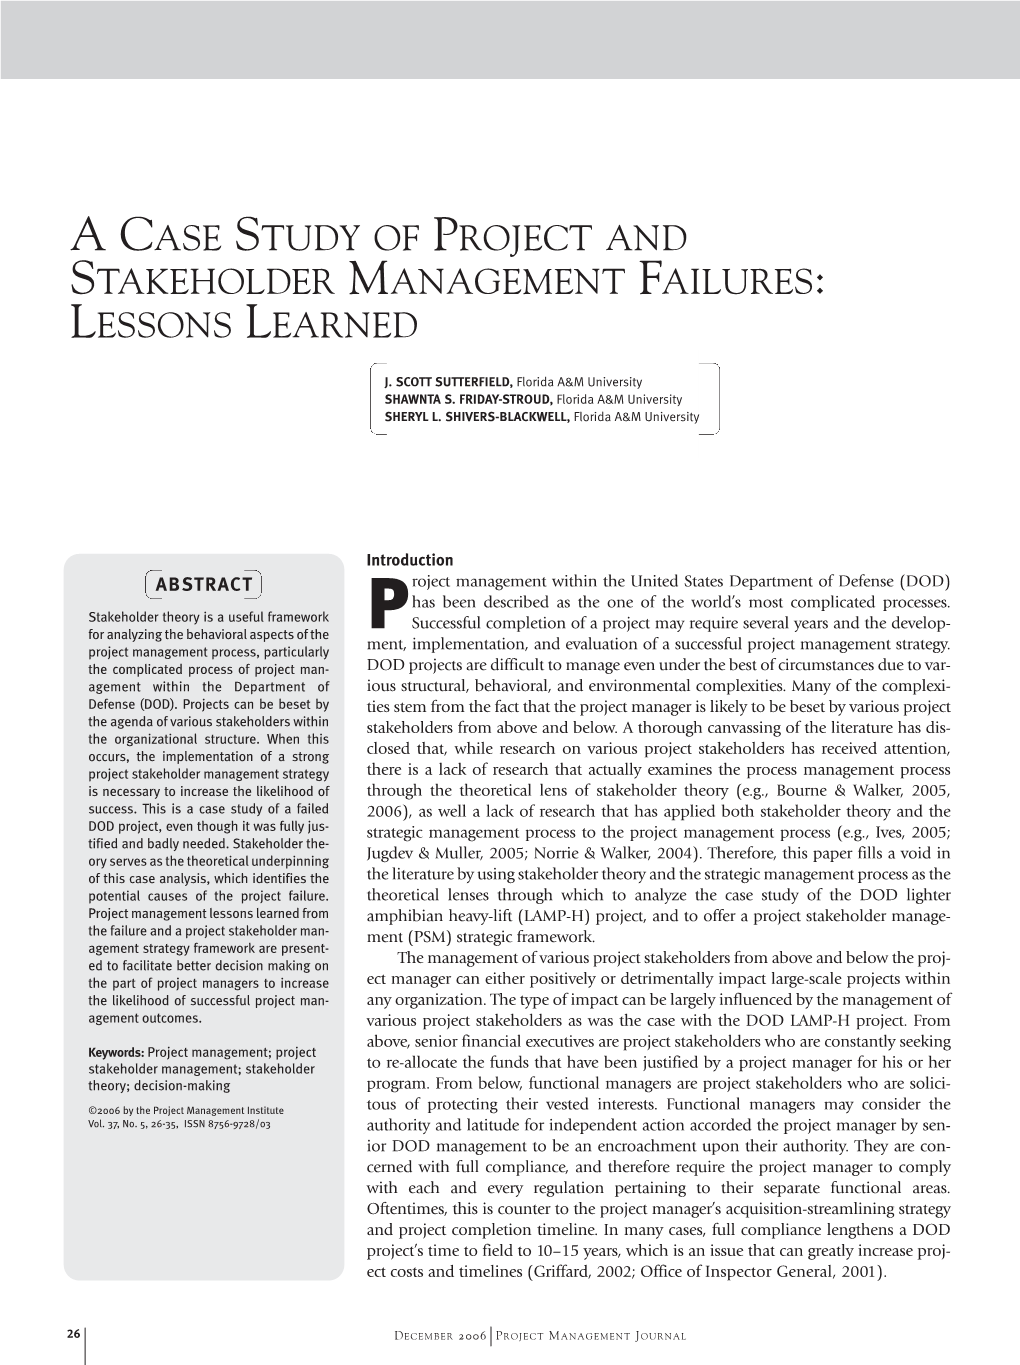 A Case Study of Project and Stakeholder Management Failures: Lessons Learned